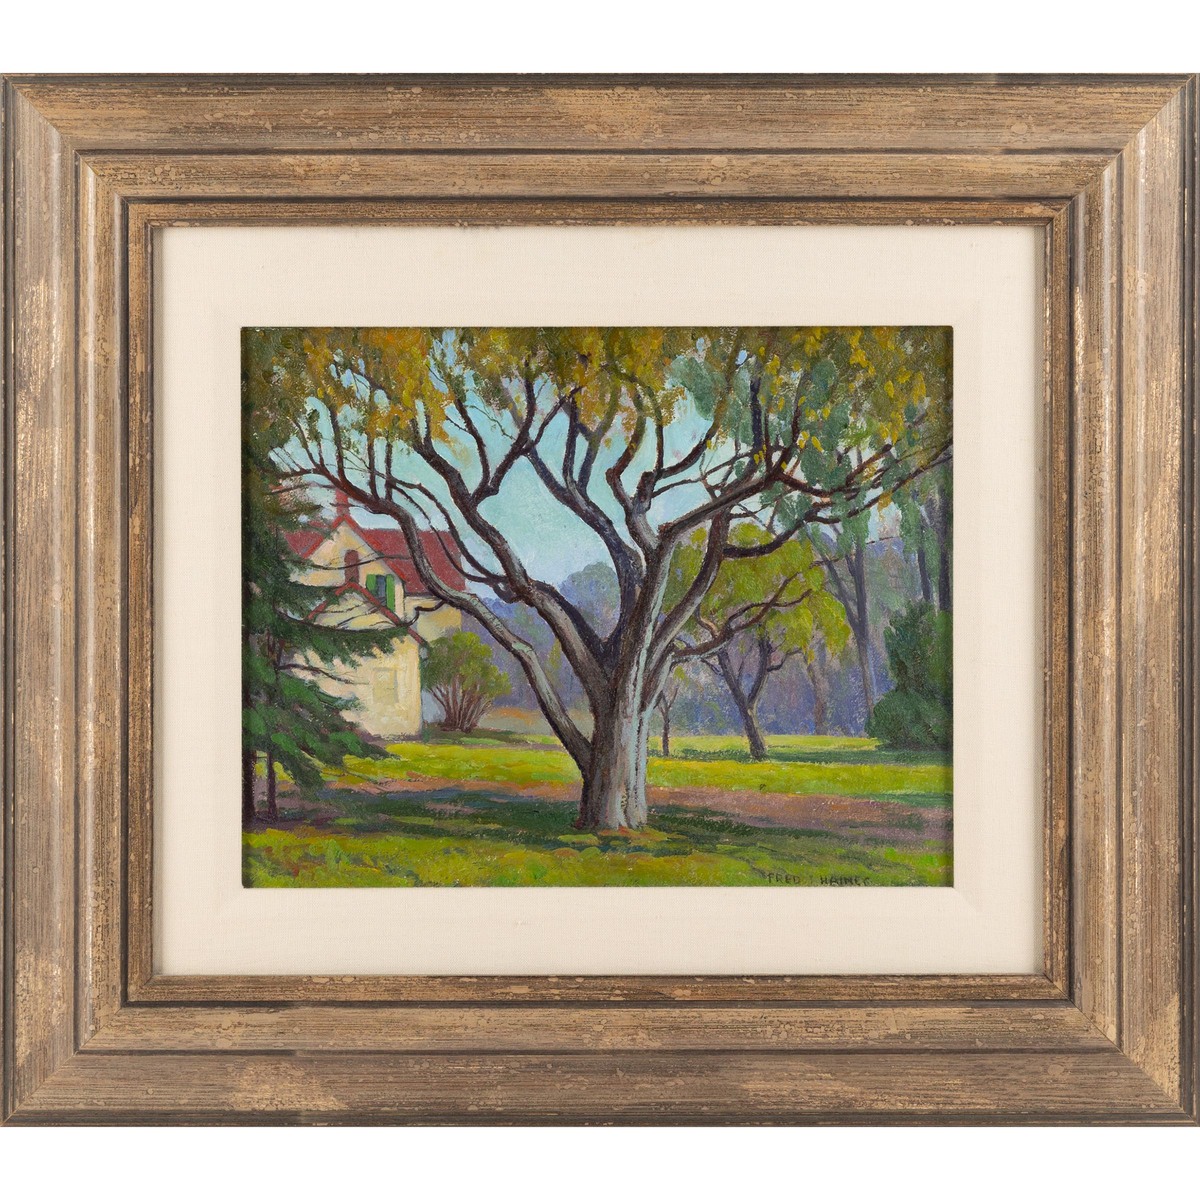 Frederick Stanley Haines, RCA (1879-1960), UNTITLED (HOUSE AND TREES), 12 x 15 in — 30.5 x 38.1 cm - Image 3 of 4